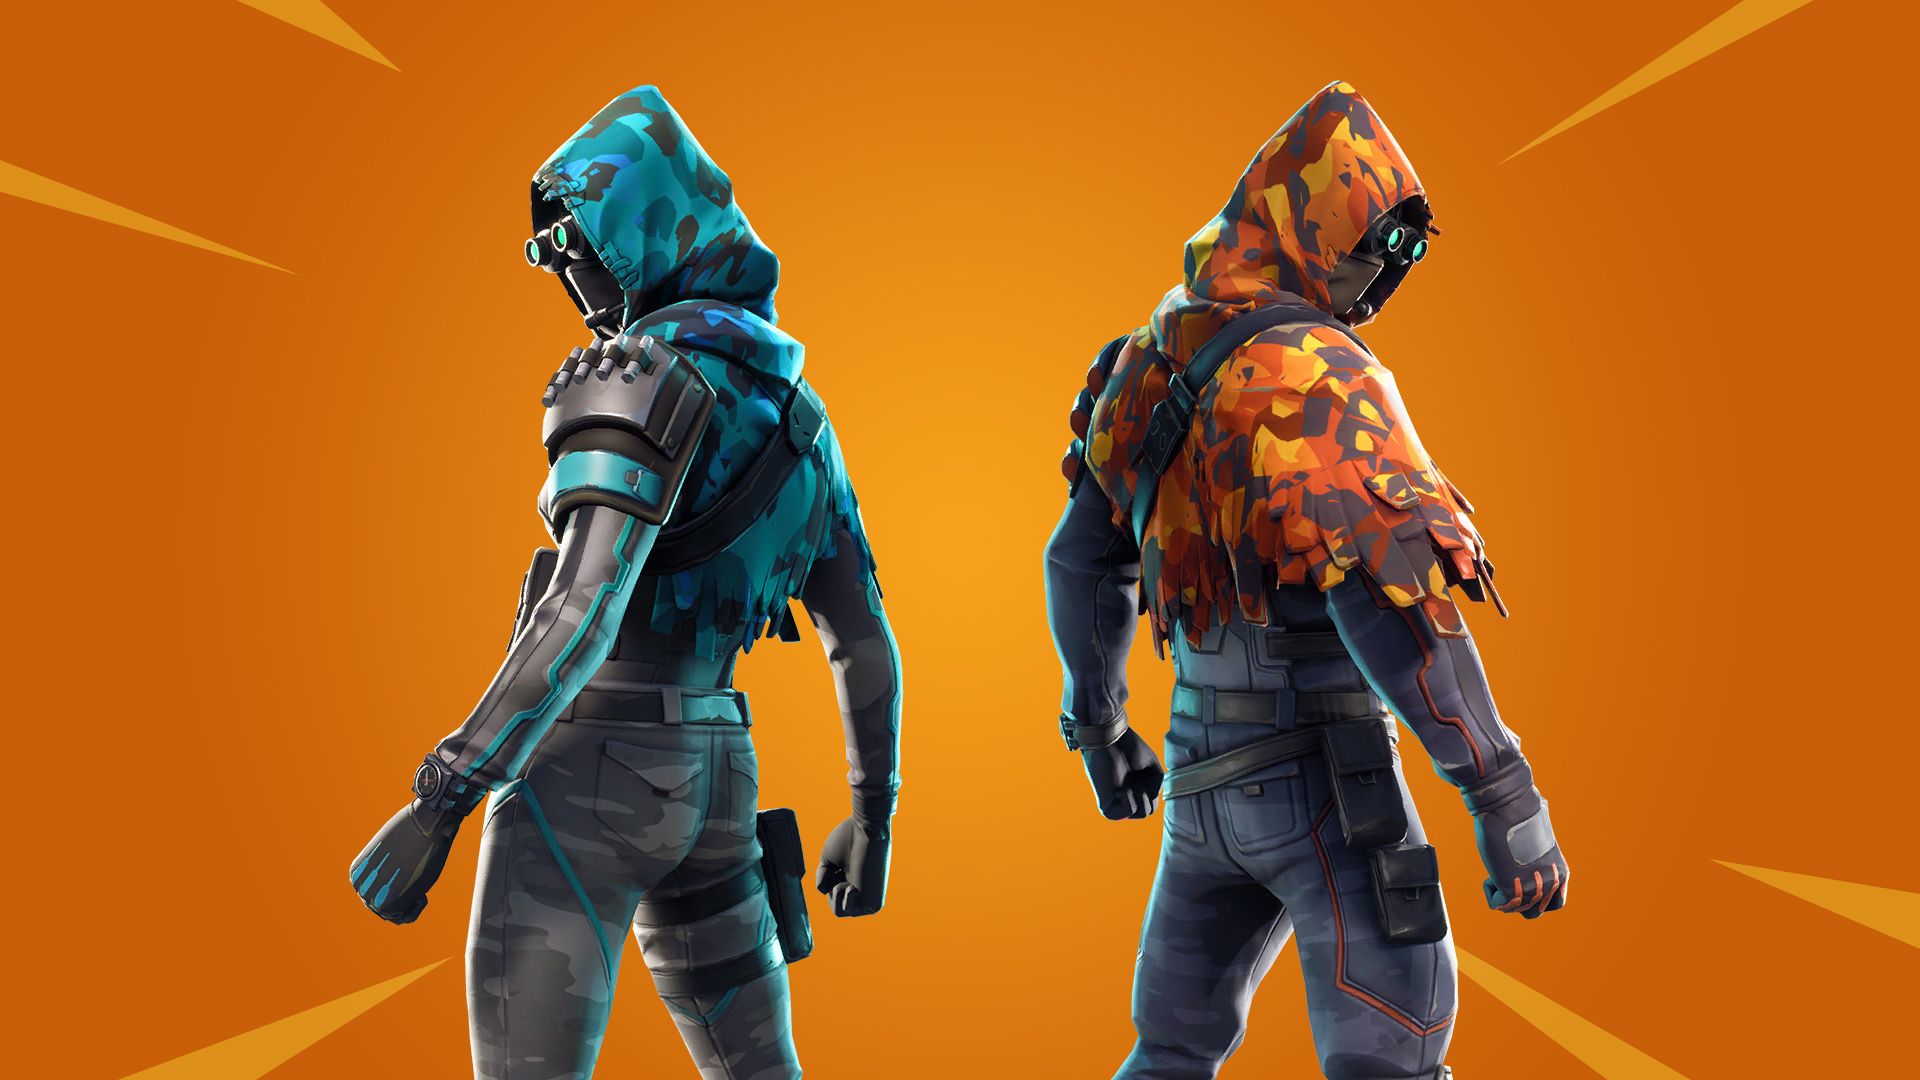 Upcoming cosmetics found in Patch v6.31 game files